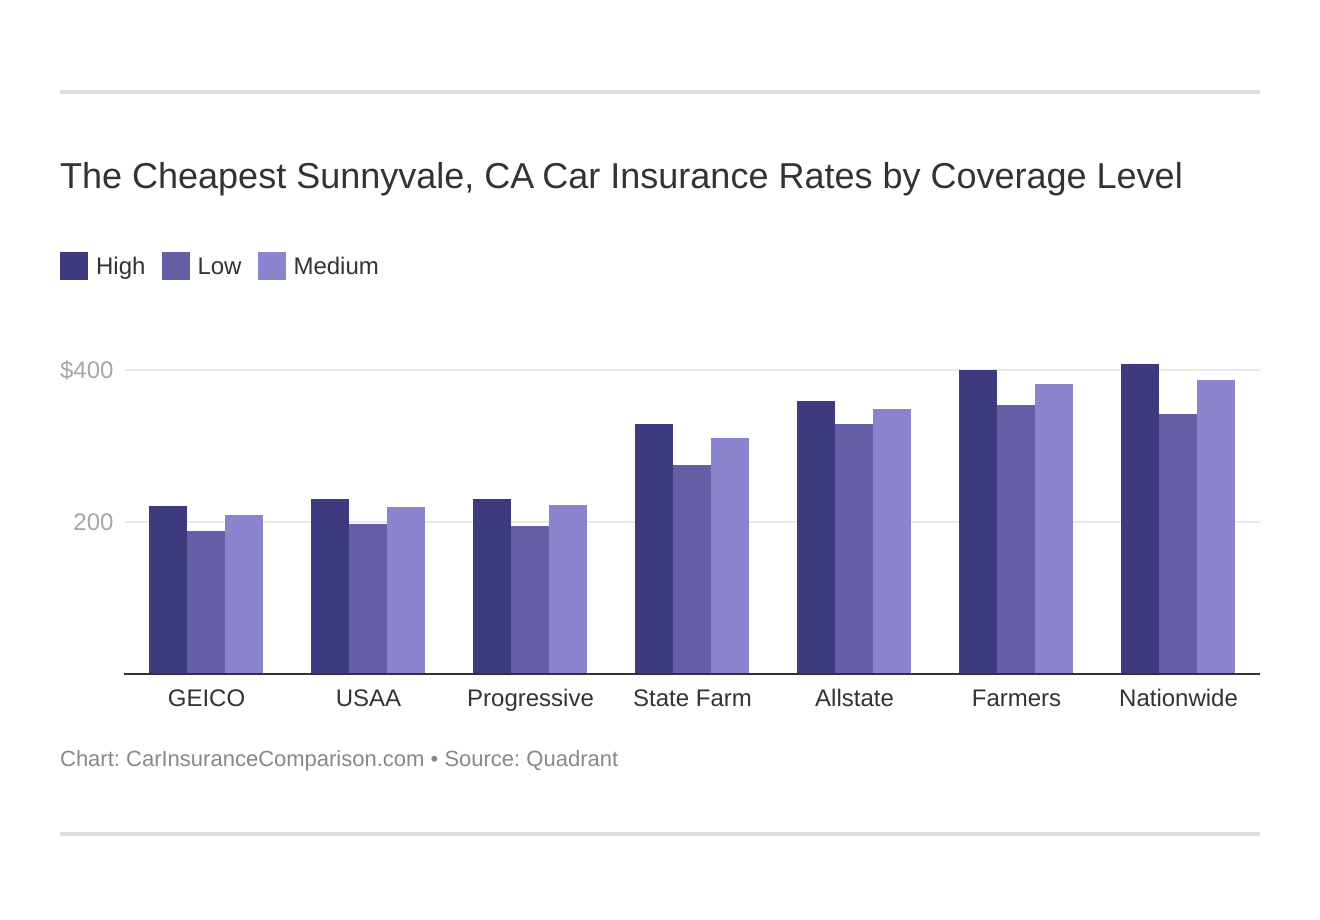 The Cheapest Sunnyvale, CA Car Insurance Rates by Coverage Level